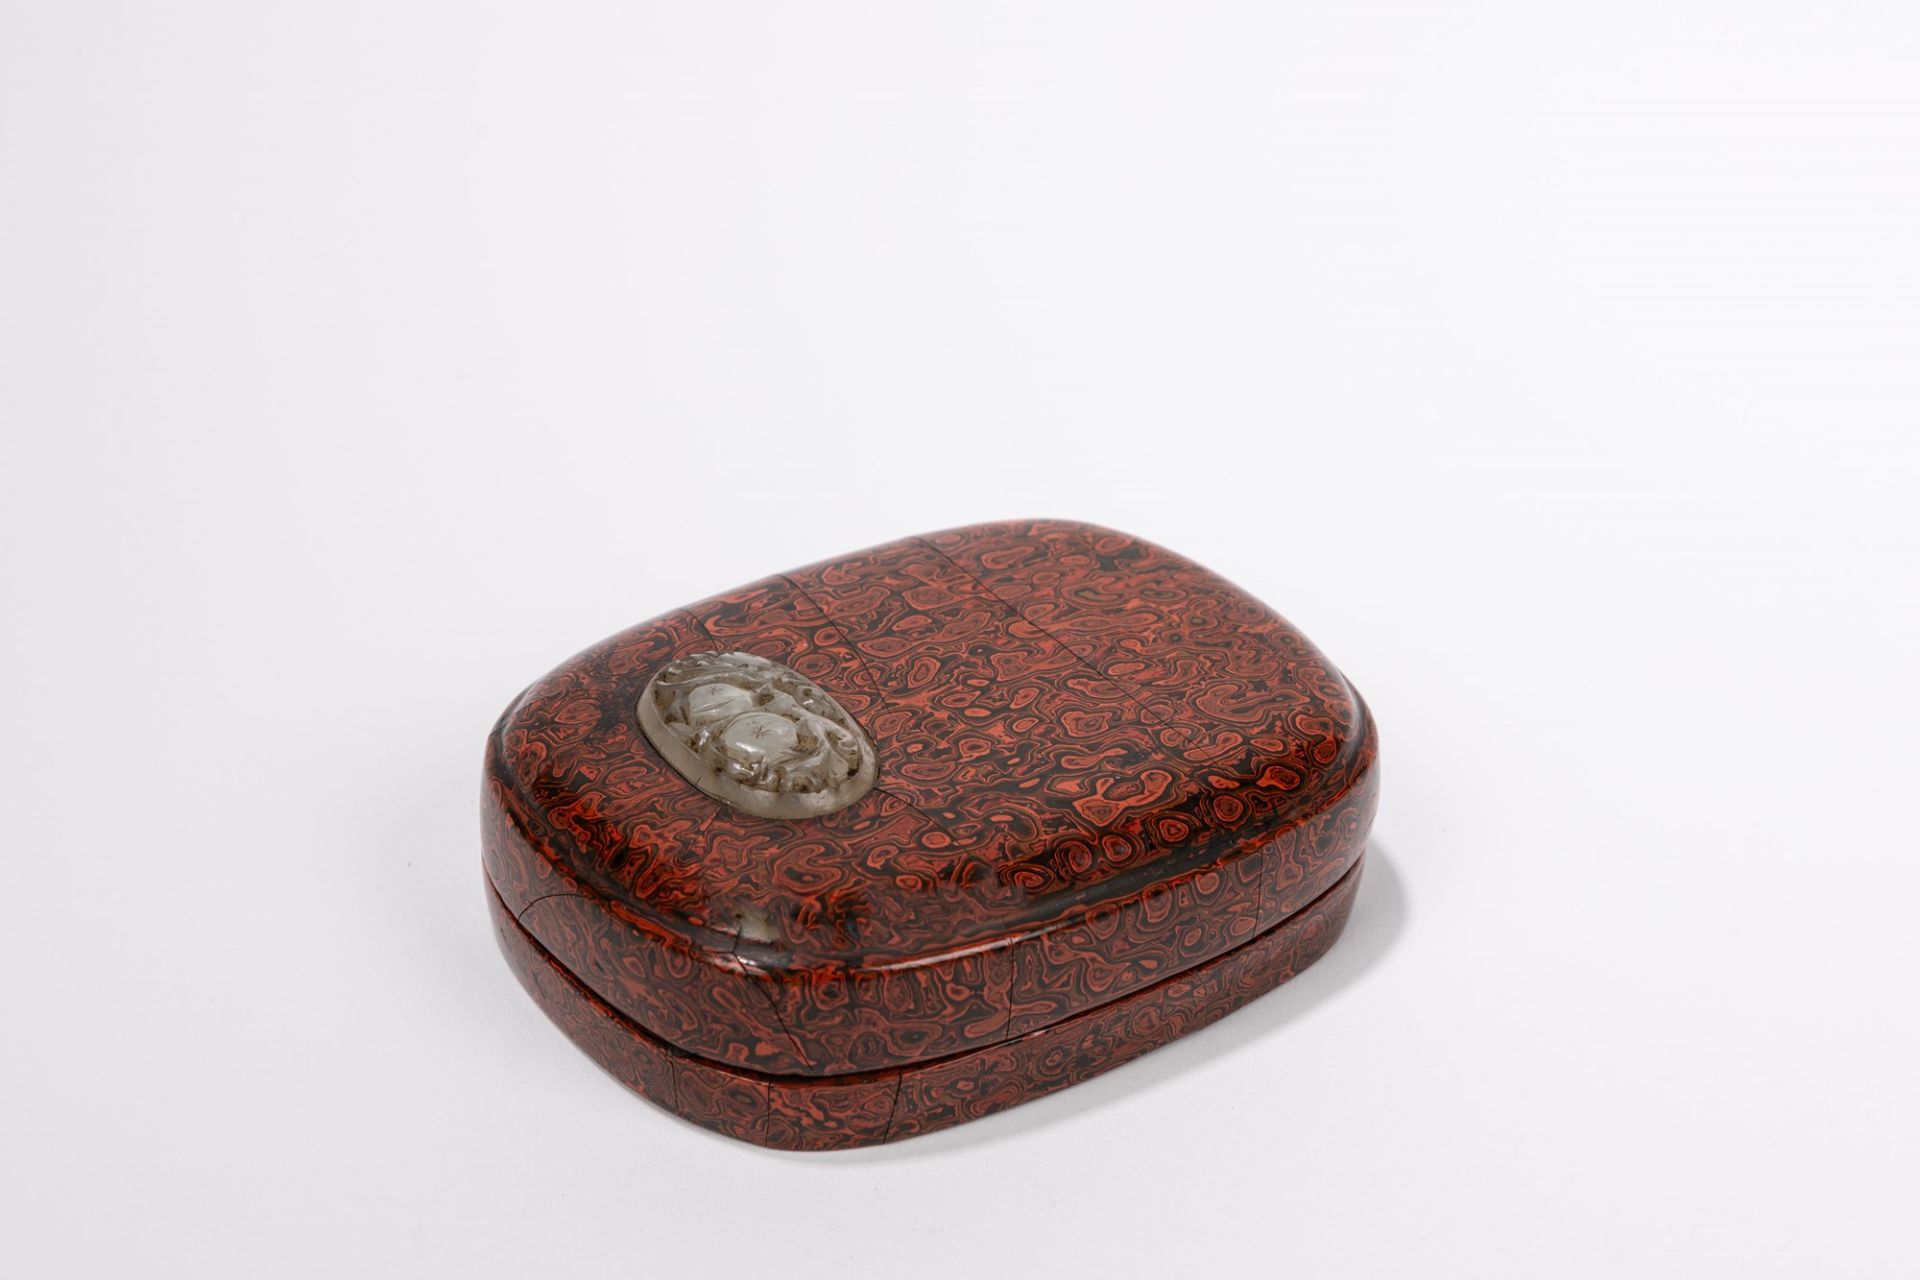 INK STONE WITH LACQUER BOX, China, Qing dynasty, 18th / 19th century - Image 2 of 4